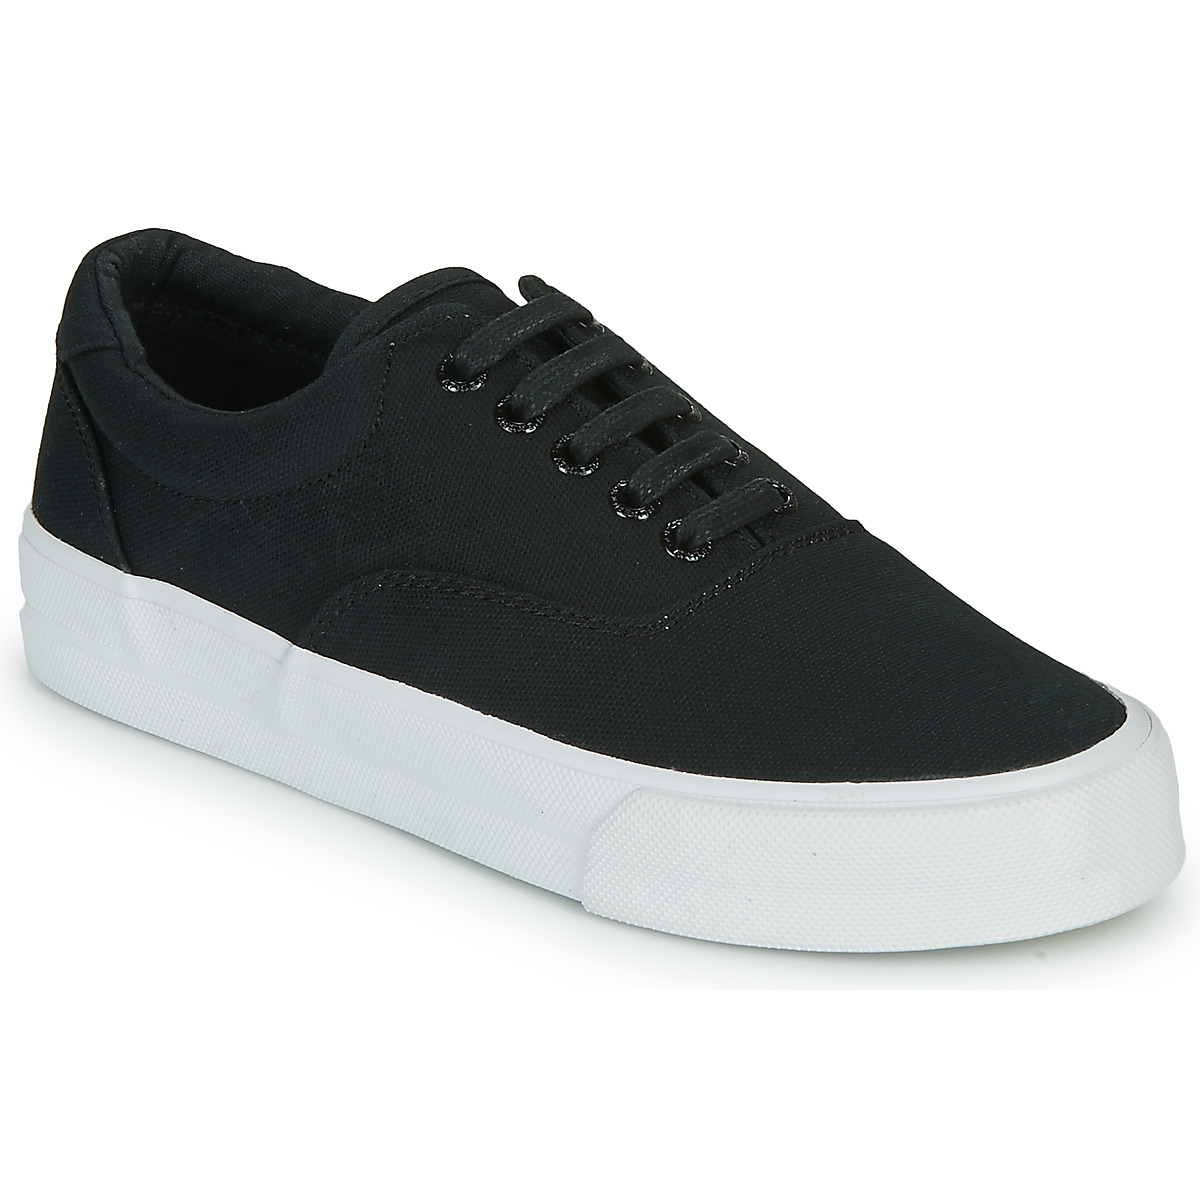 Superdry Classic Lace Up Trainer Black